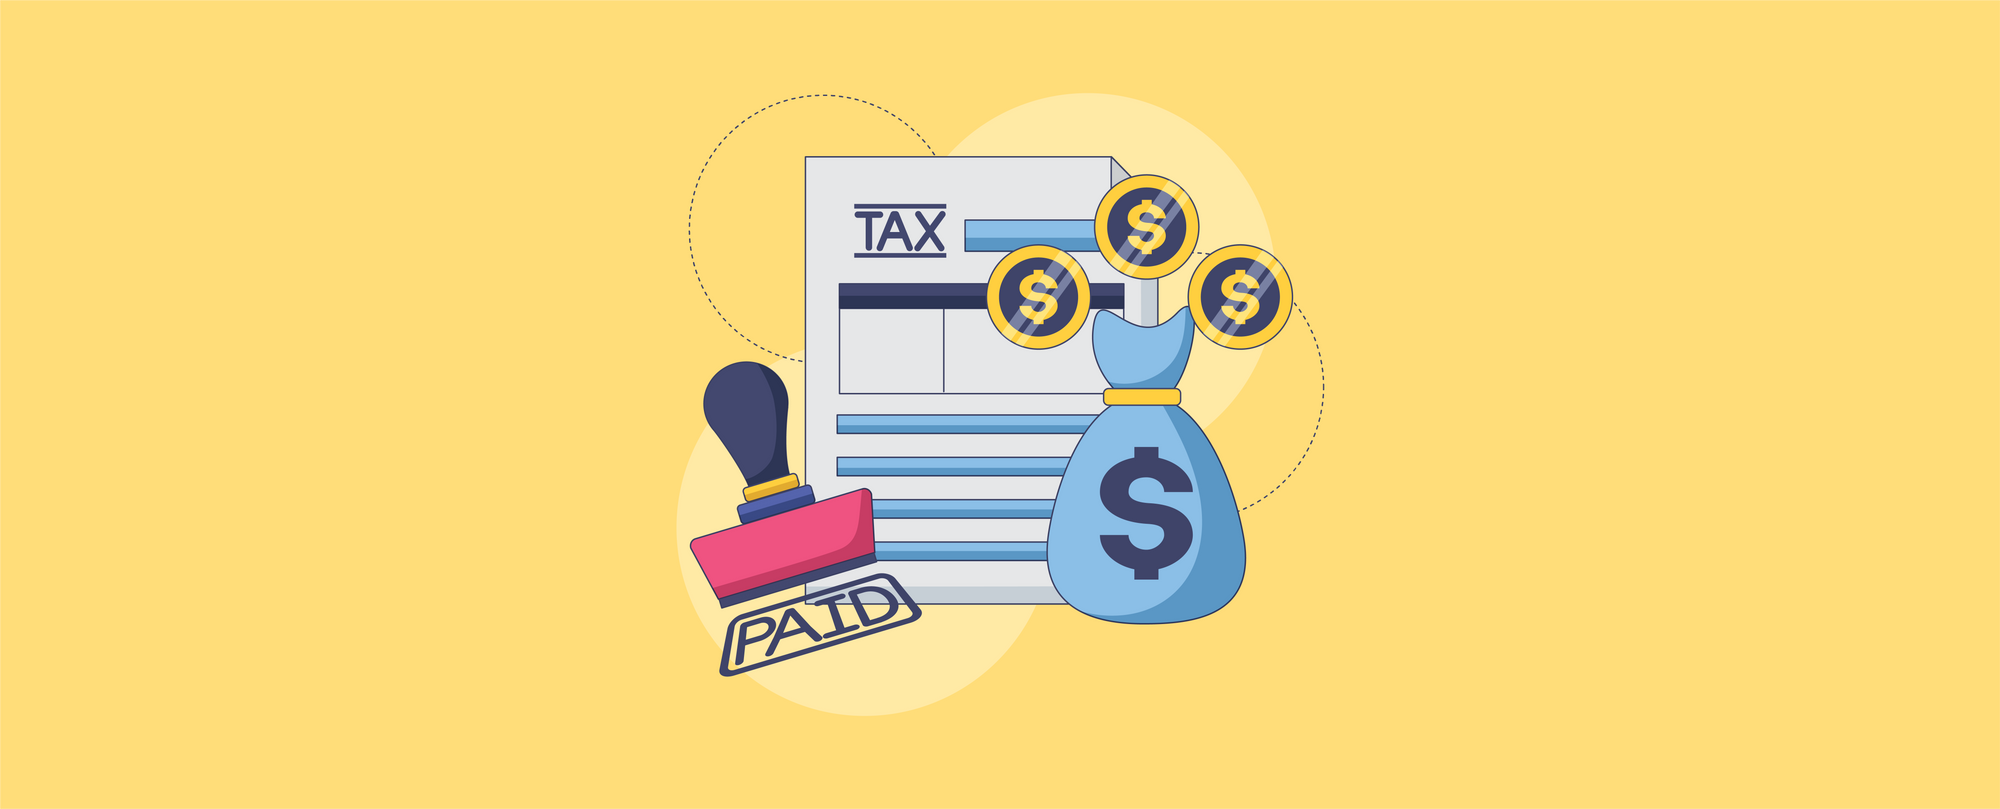 Remote Employees and Taxes: An HR Guide to Maintaining A Remote Office